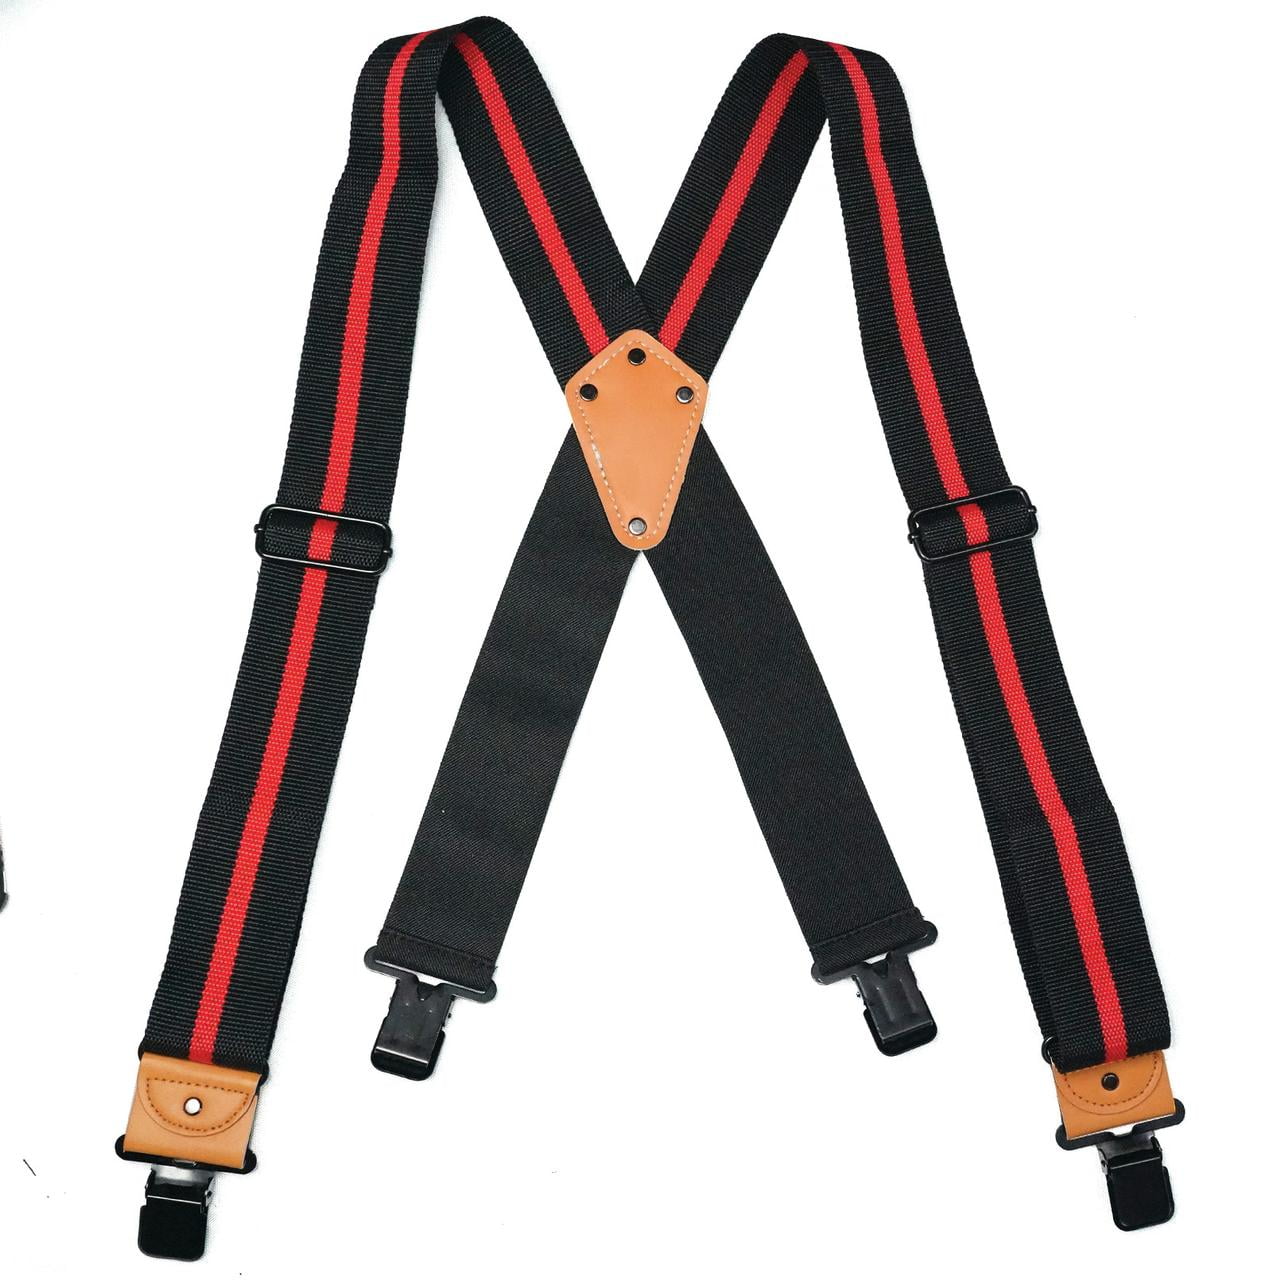 Melo Tough Y back suspenders airport friendly Suspenders,NO buzz with  Plastic Clip 1.5 inch fully elastic braces